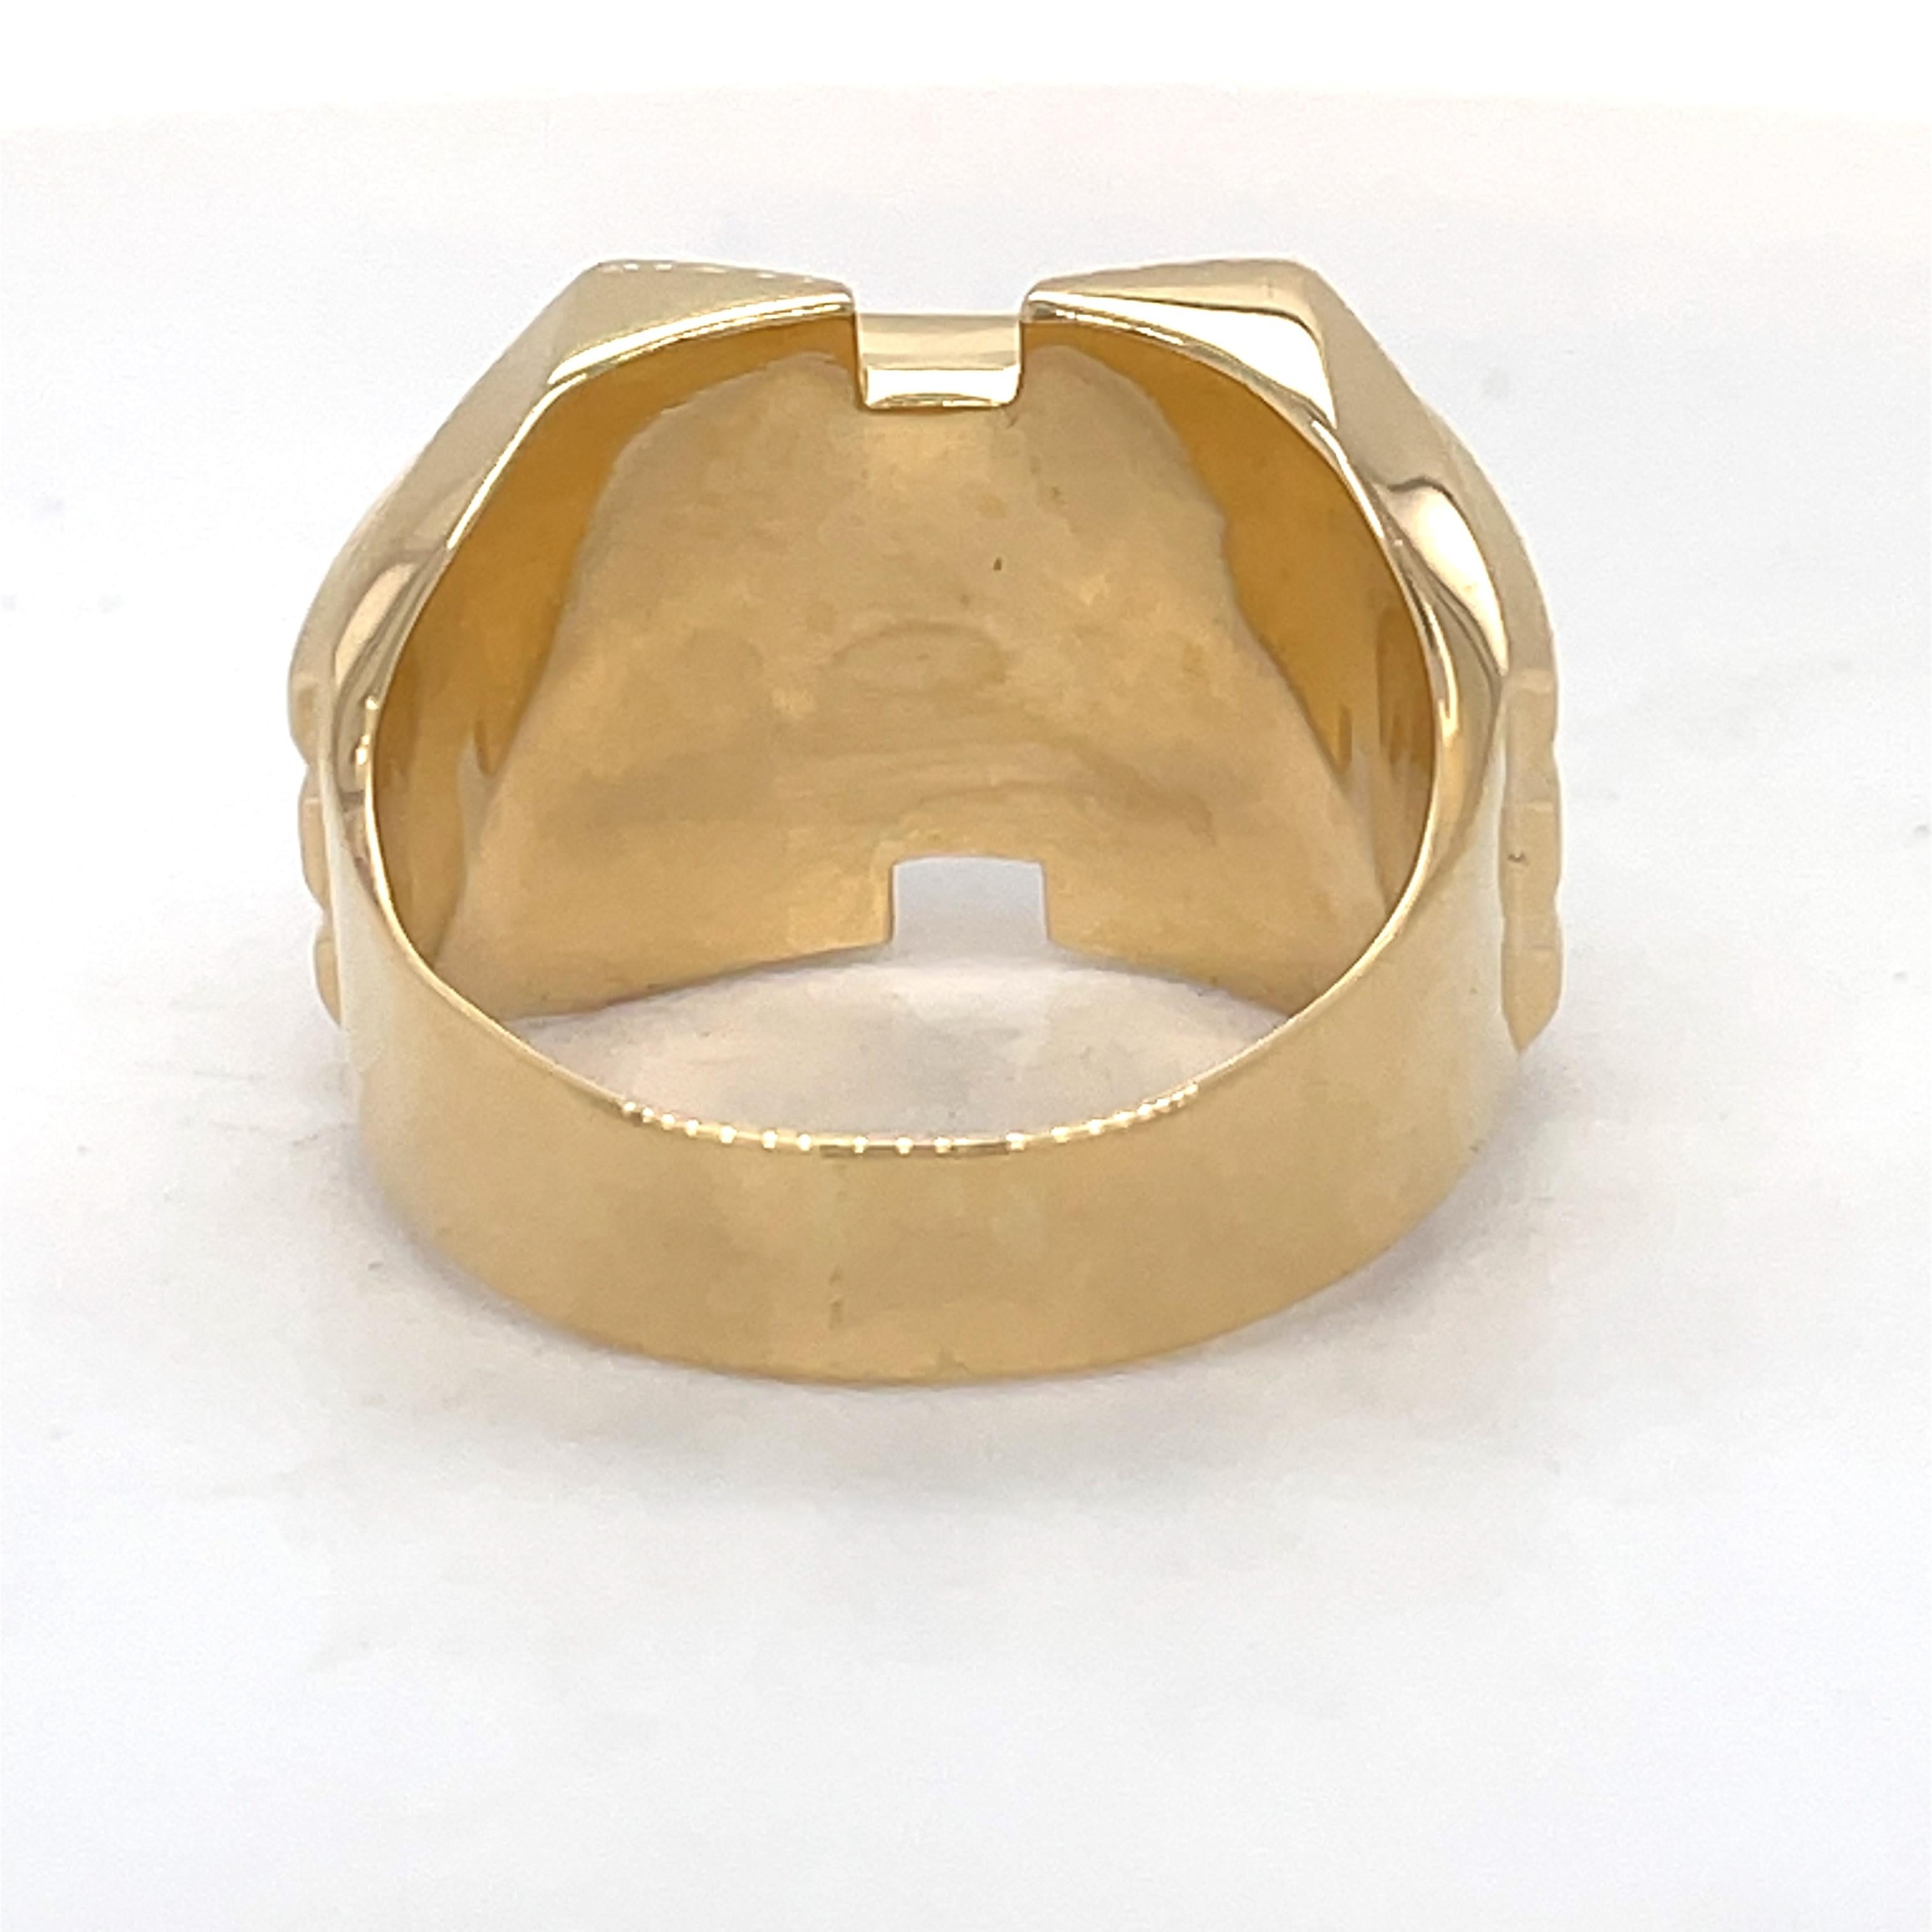 Unisex Gold Signet Ring, Vintage Style Ring, 18k Yellow Gold, made to order ring For Sale 3